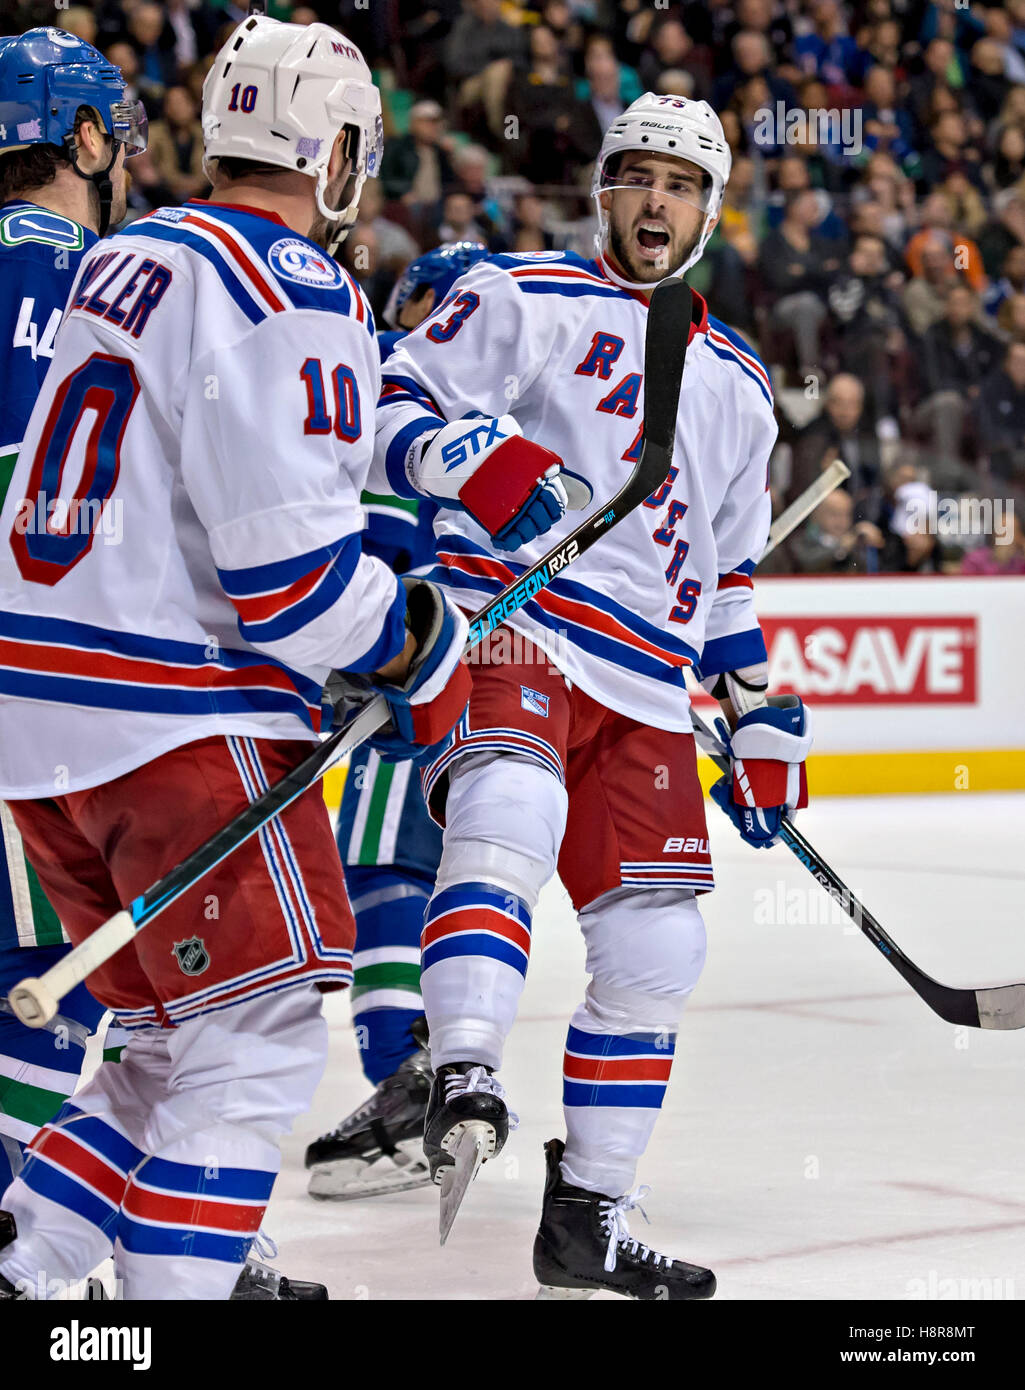 Vancouver, Canada. 15th Nov, 2016. New York Rangers' Brand Pirri(R) celebrates his goal against the Vancouver Canucks during the regular season match between the New York Rangers and the Vancouver Canucks in Vancouver, Nov. 16, 2016. The New York Rangers won 7-2. Credit:  Andrew Soong/Xinhua/Alamy Live News Stock Photo